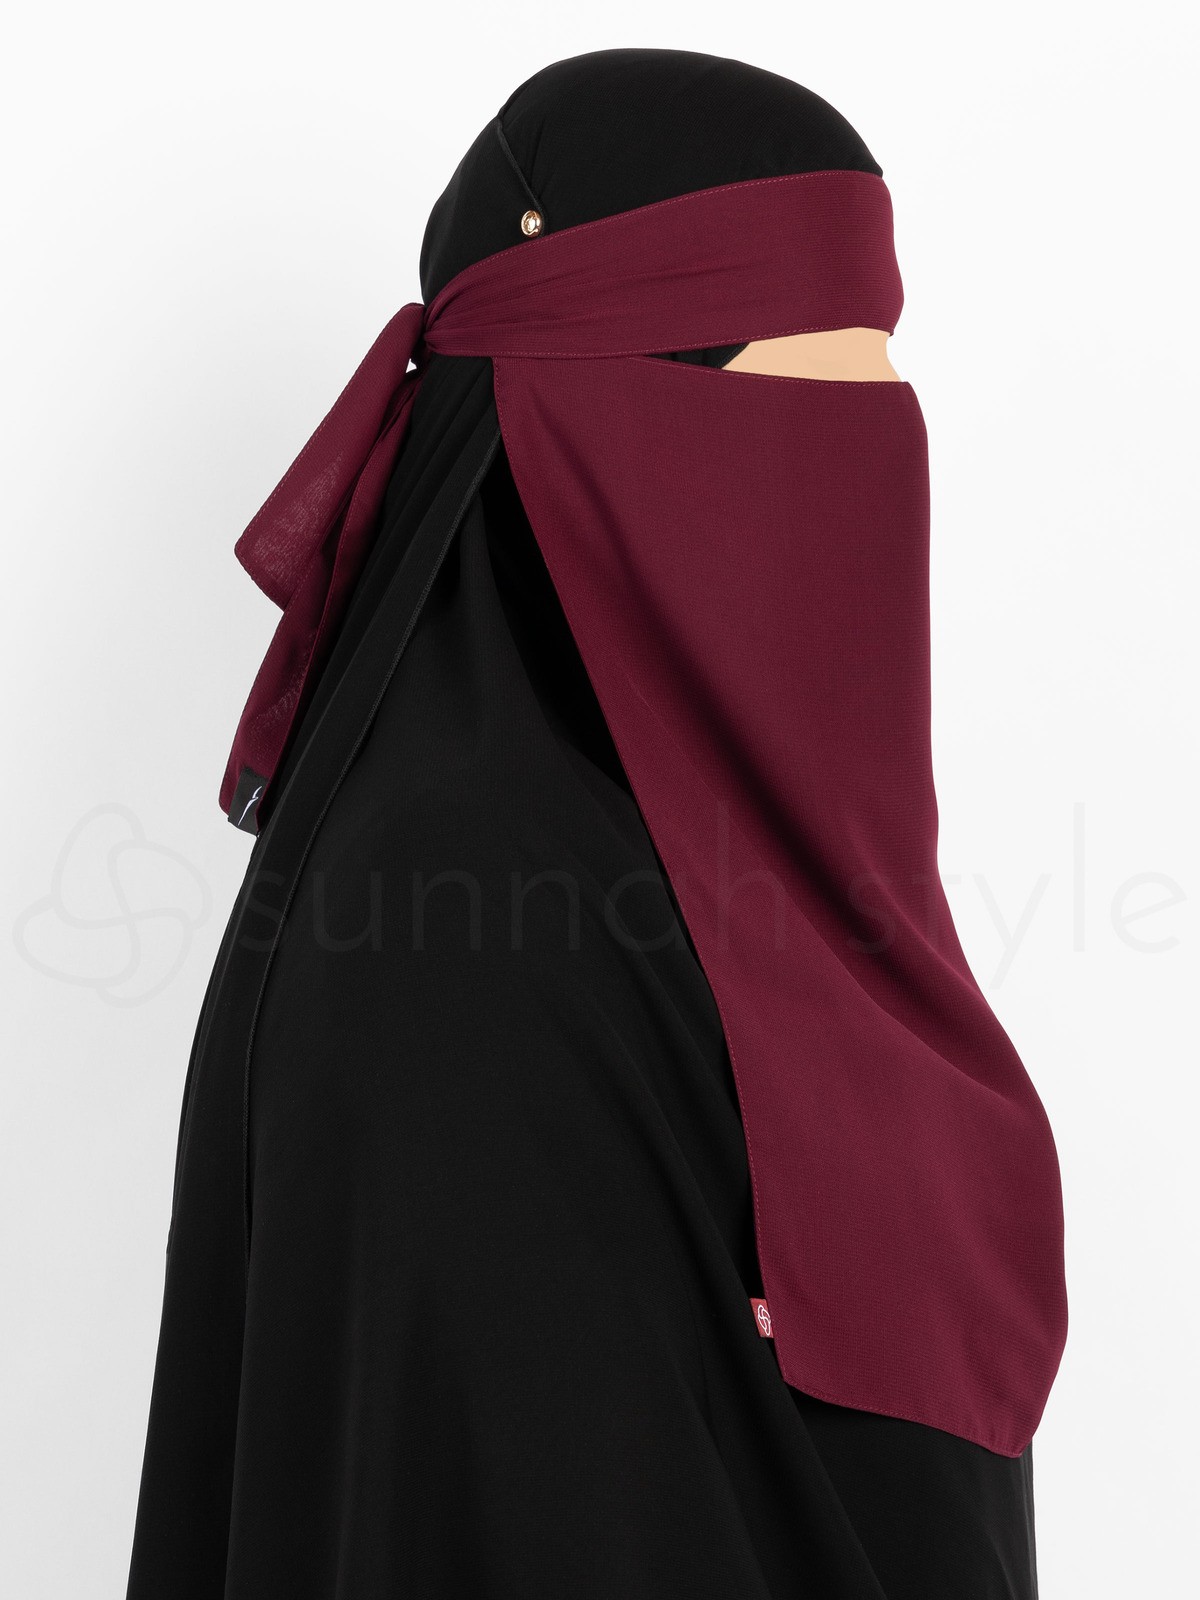 Sunnah Style - Pull-Down One Layer Niqab (Burgundy)